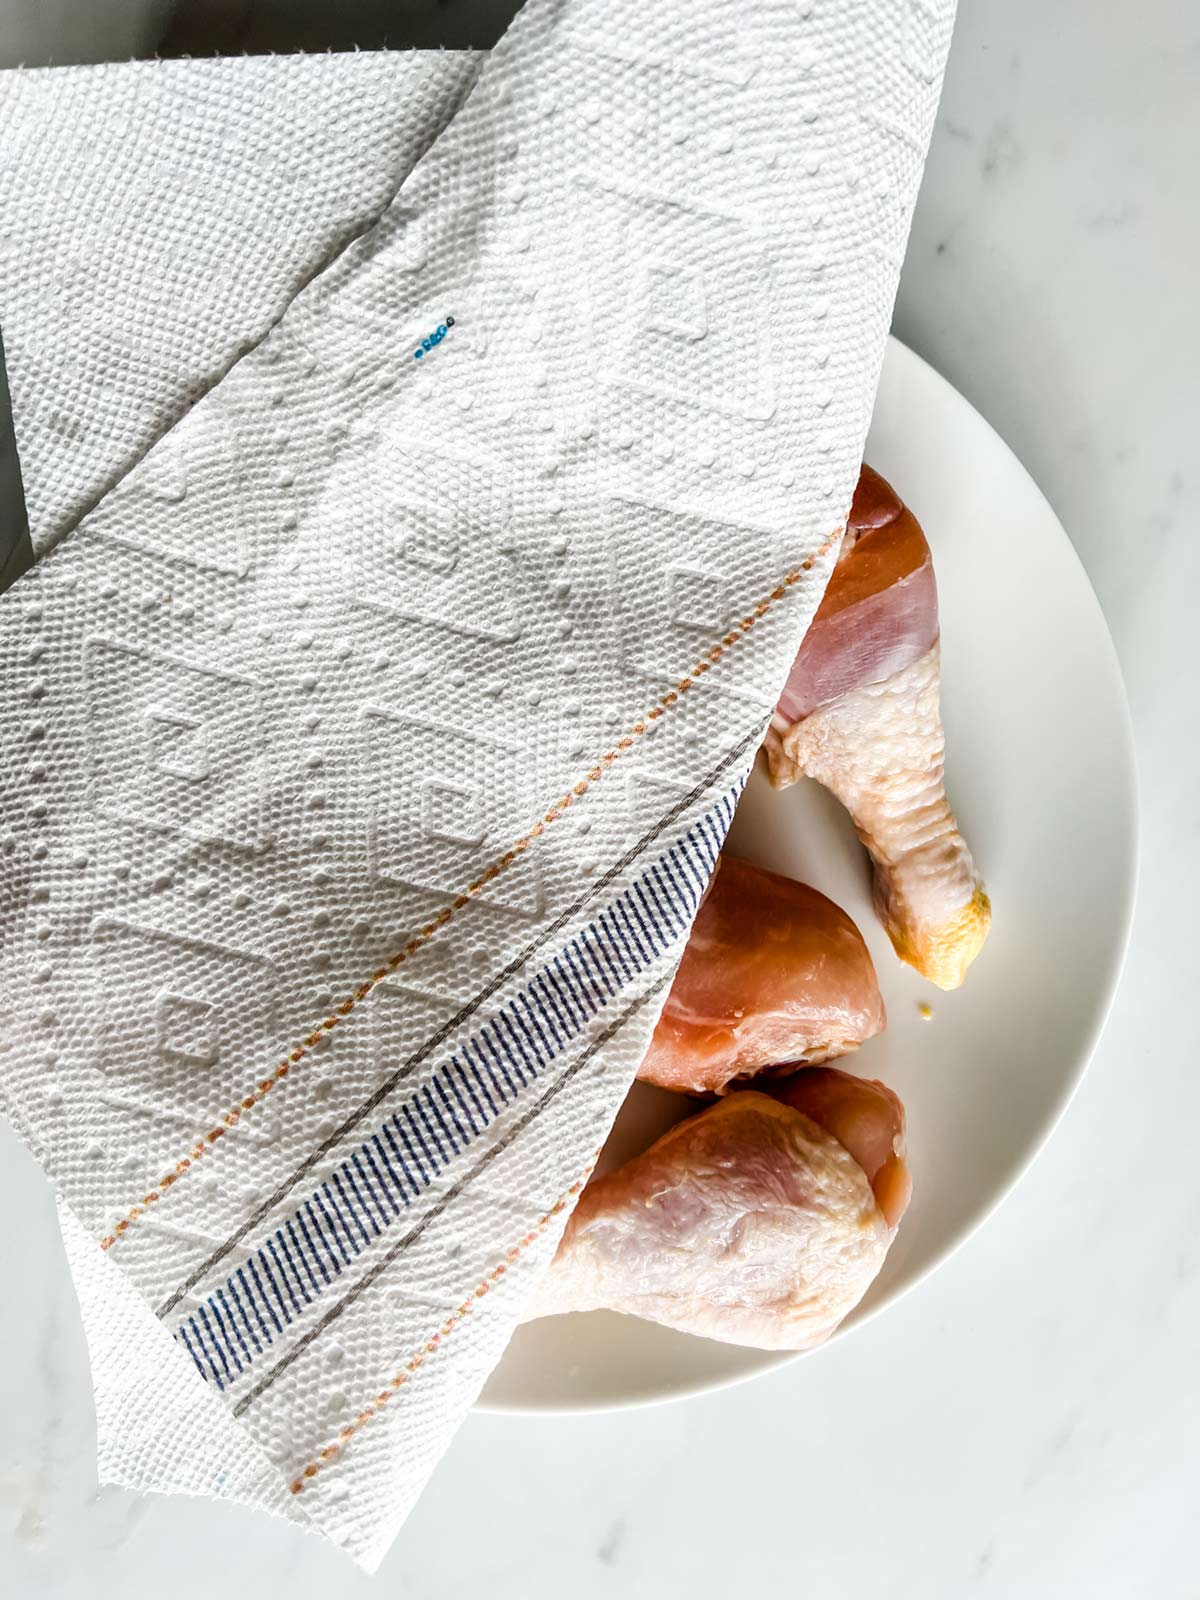 Chicken drumsticks being dried with a paper towel.